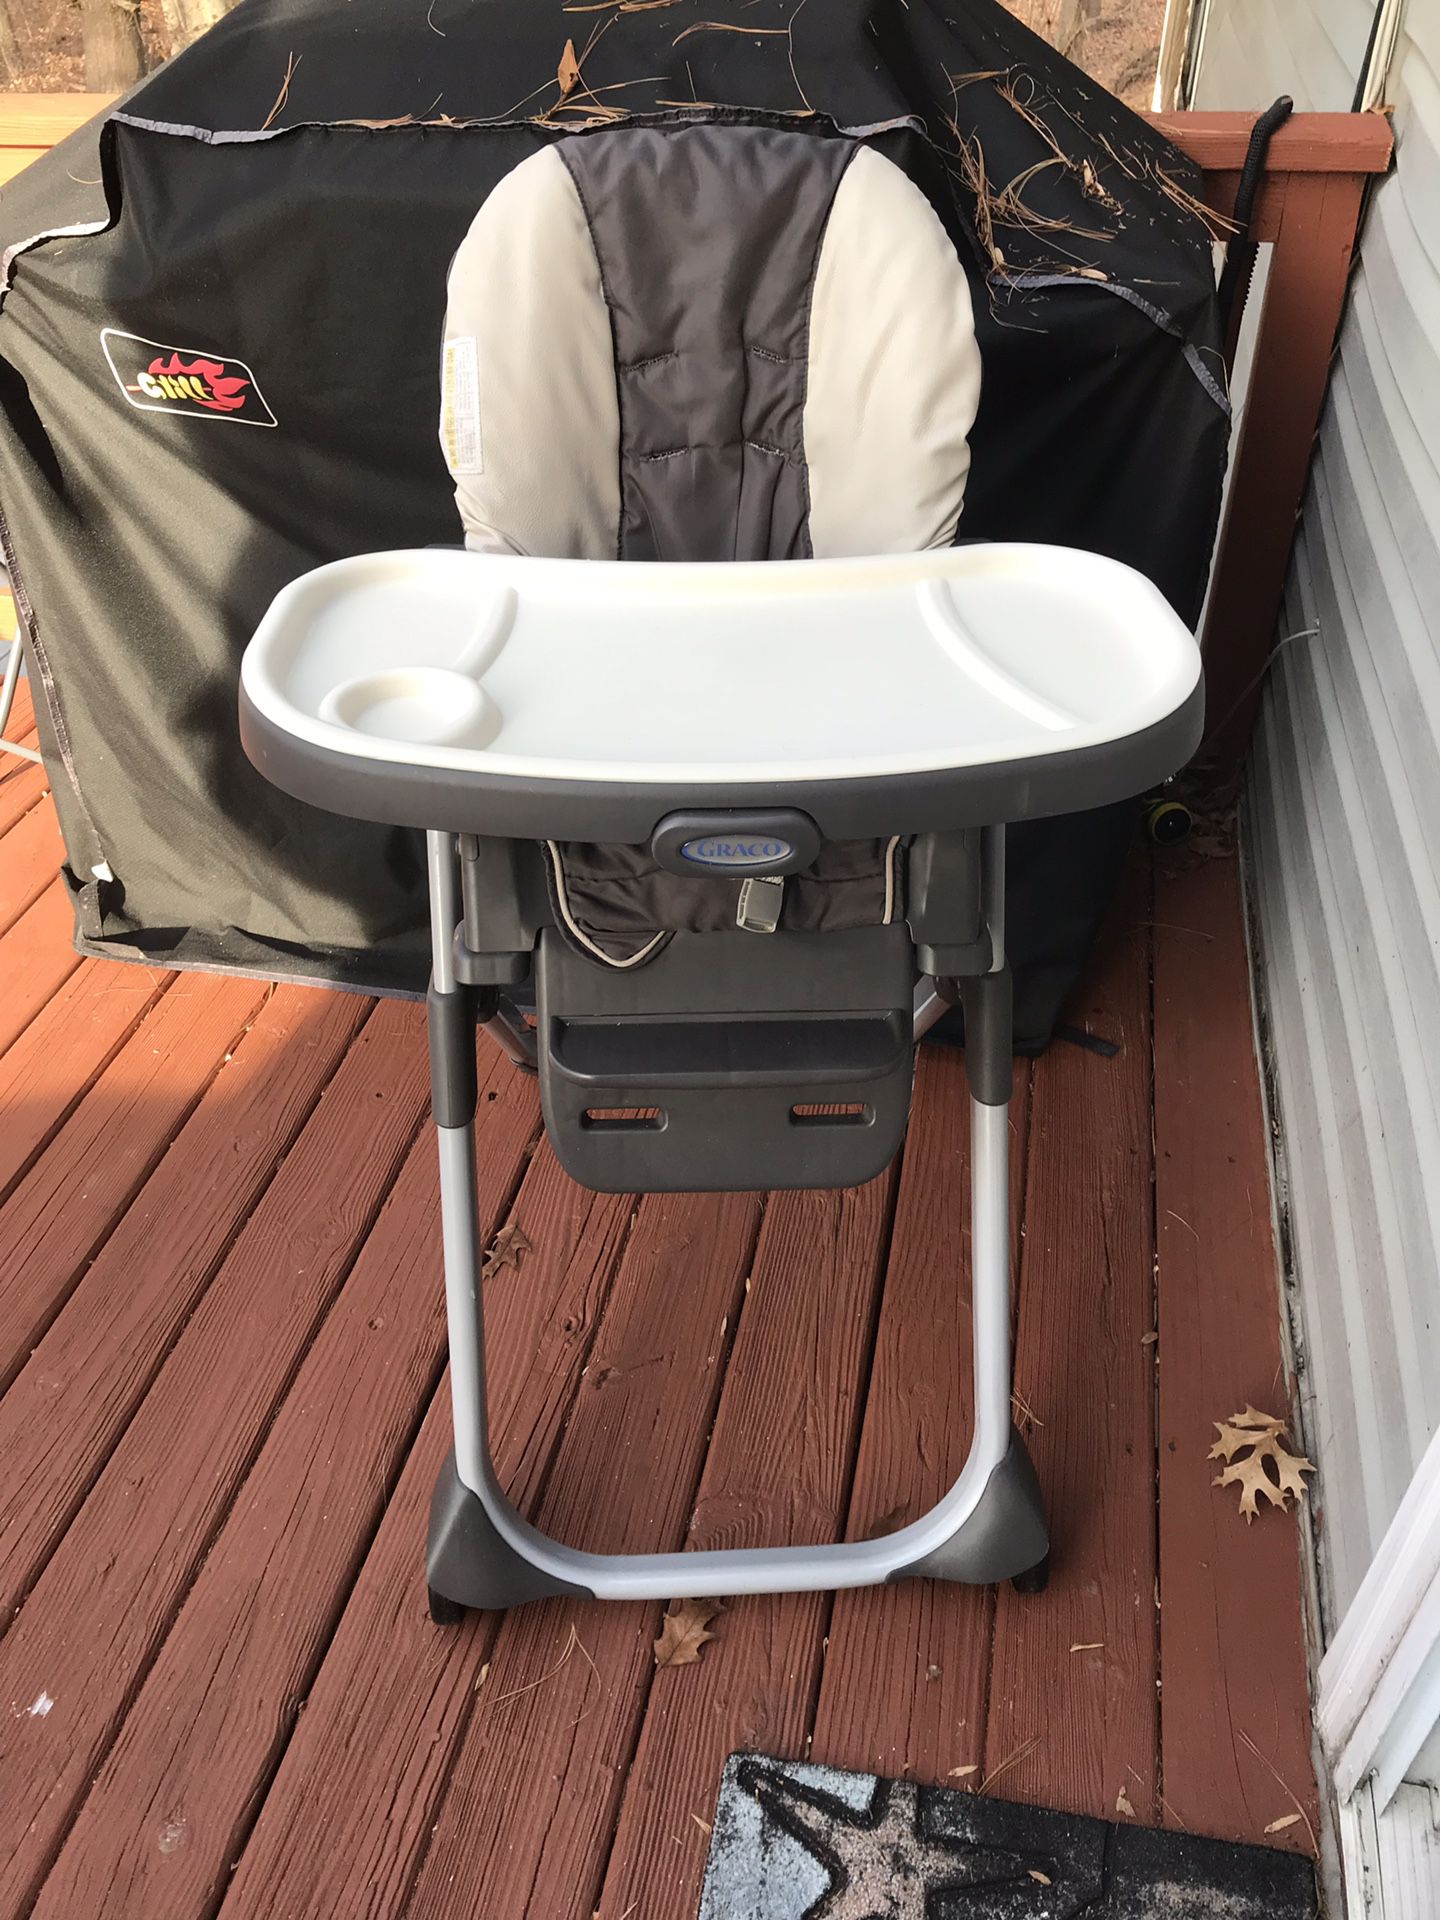 Graco 3 in 1 high chair